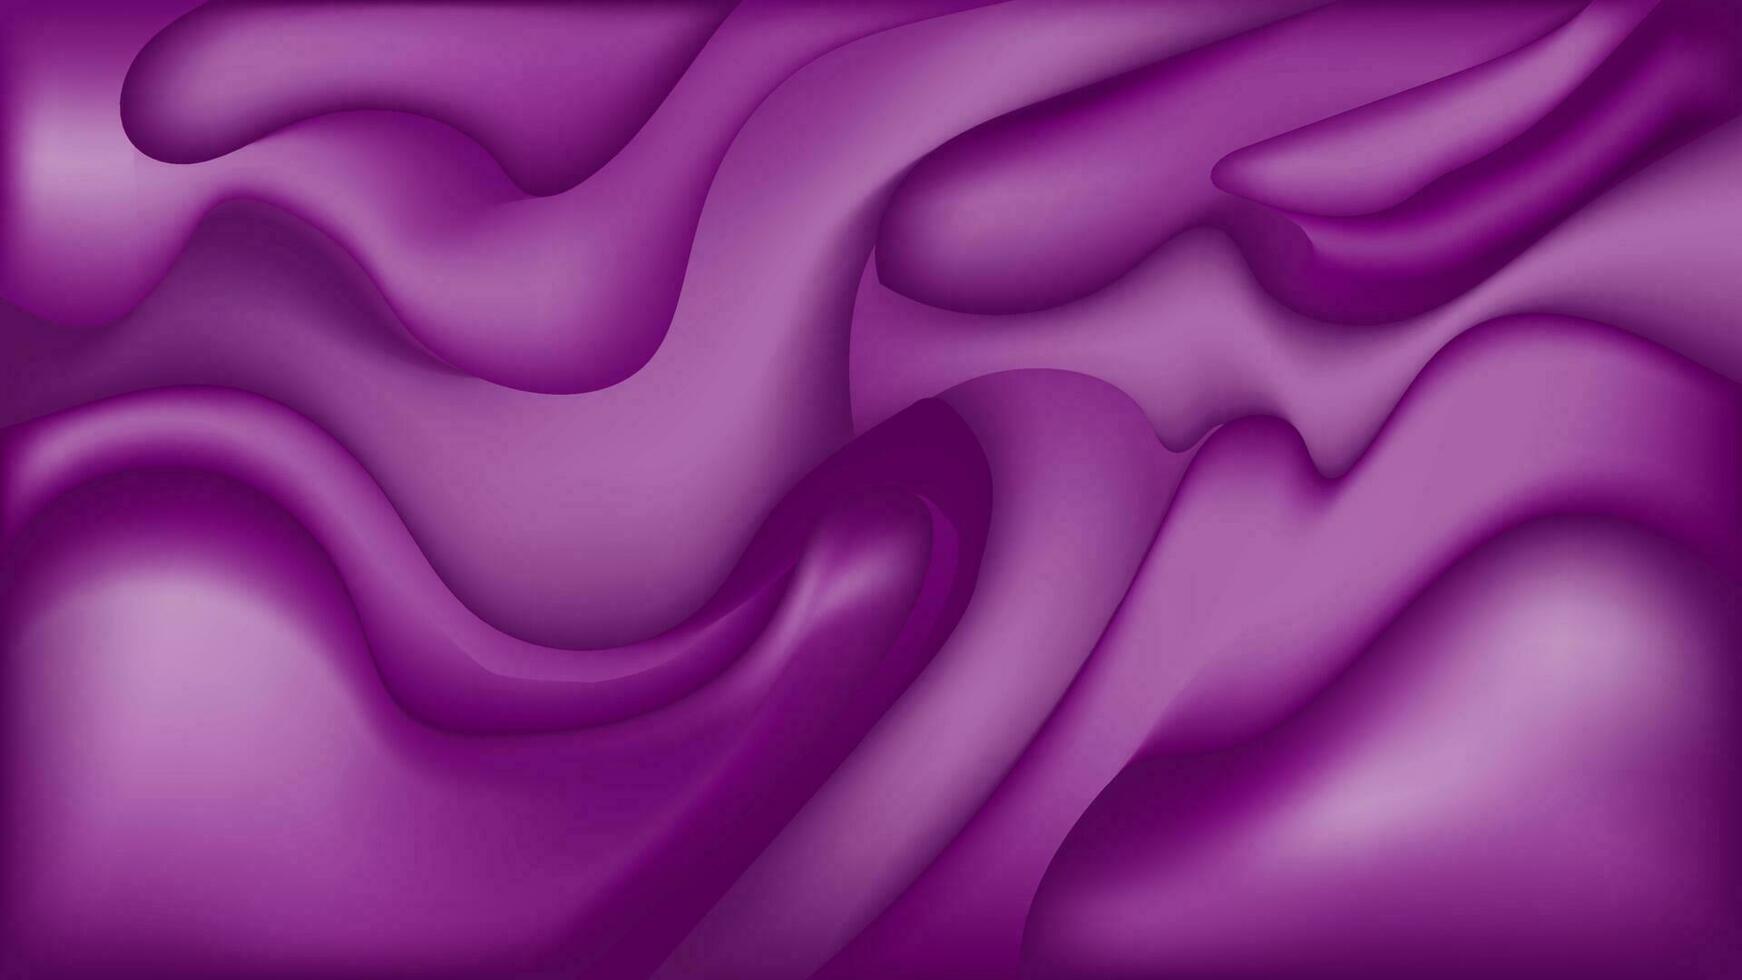 Abstract wavy luxury 3d purple background vector